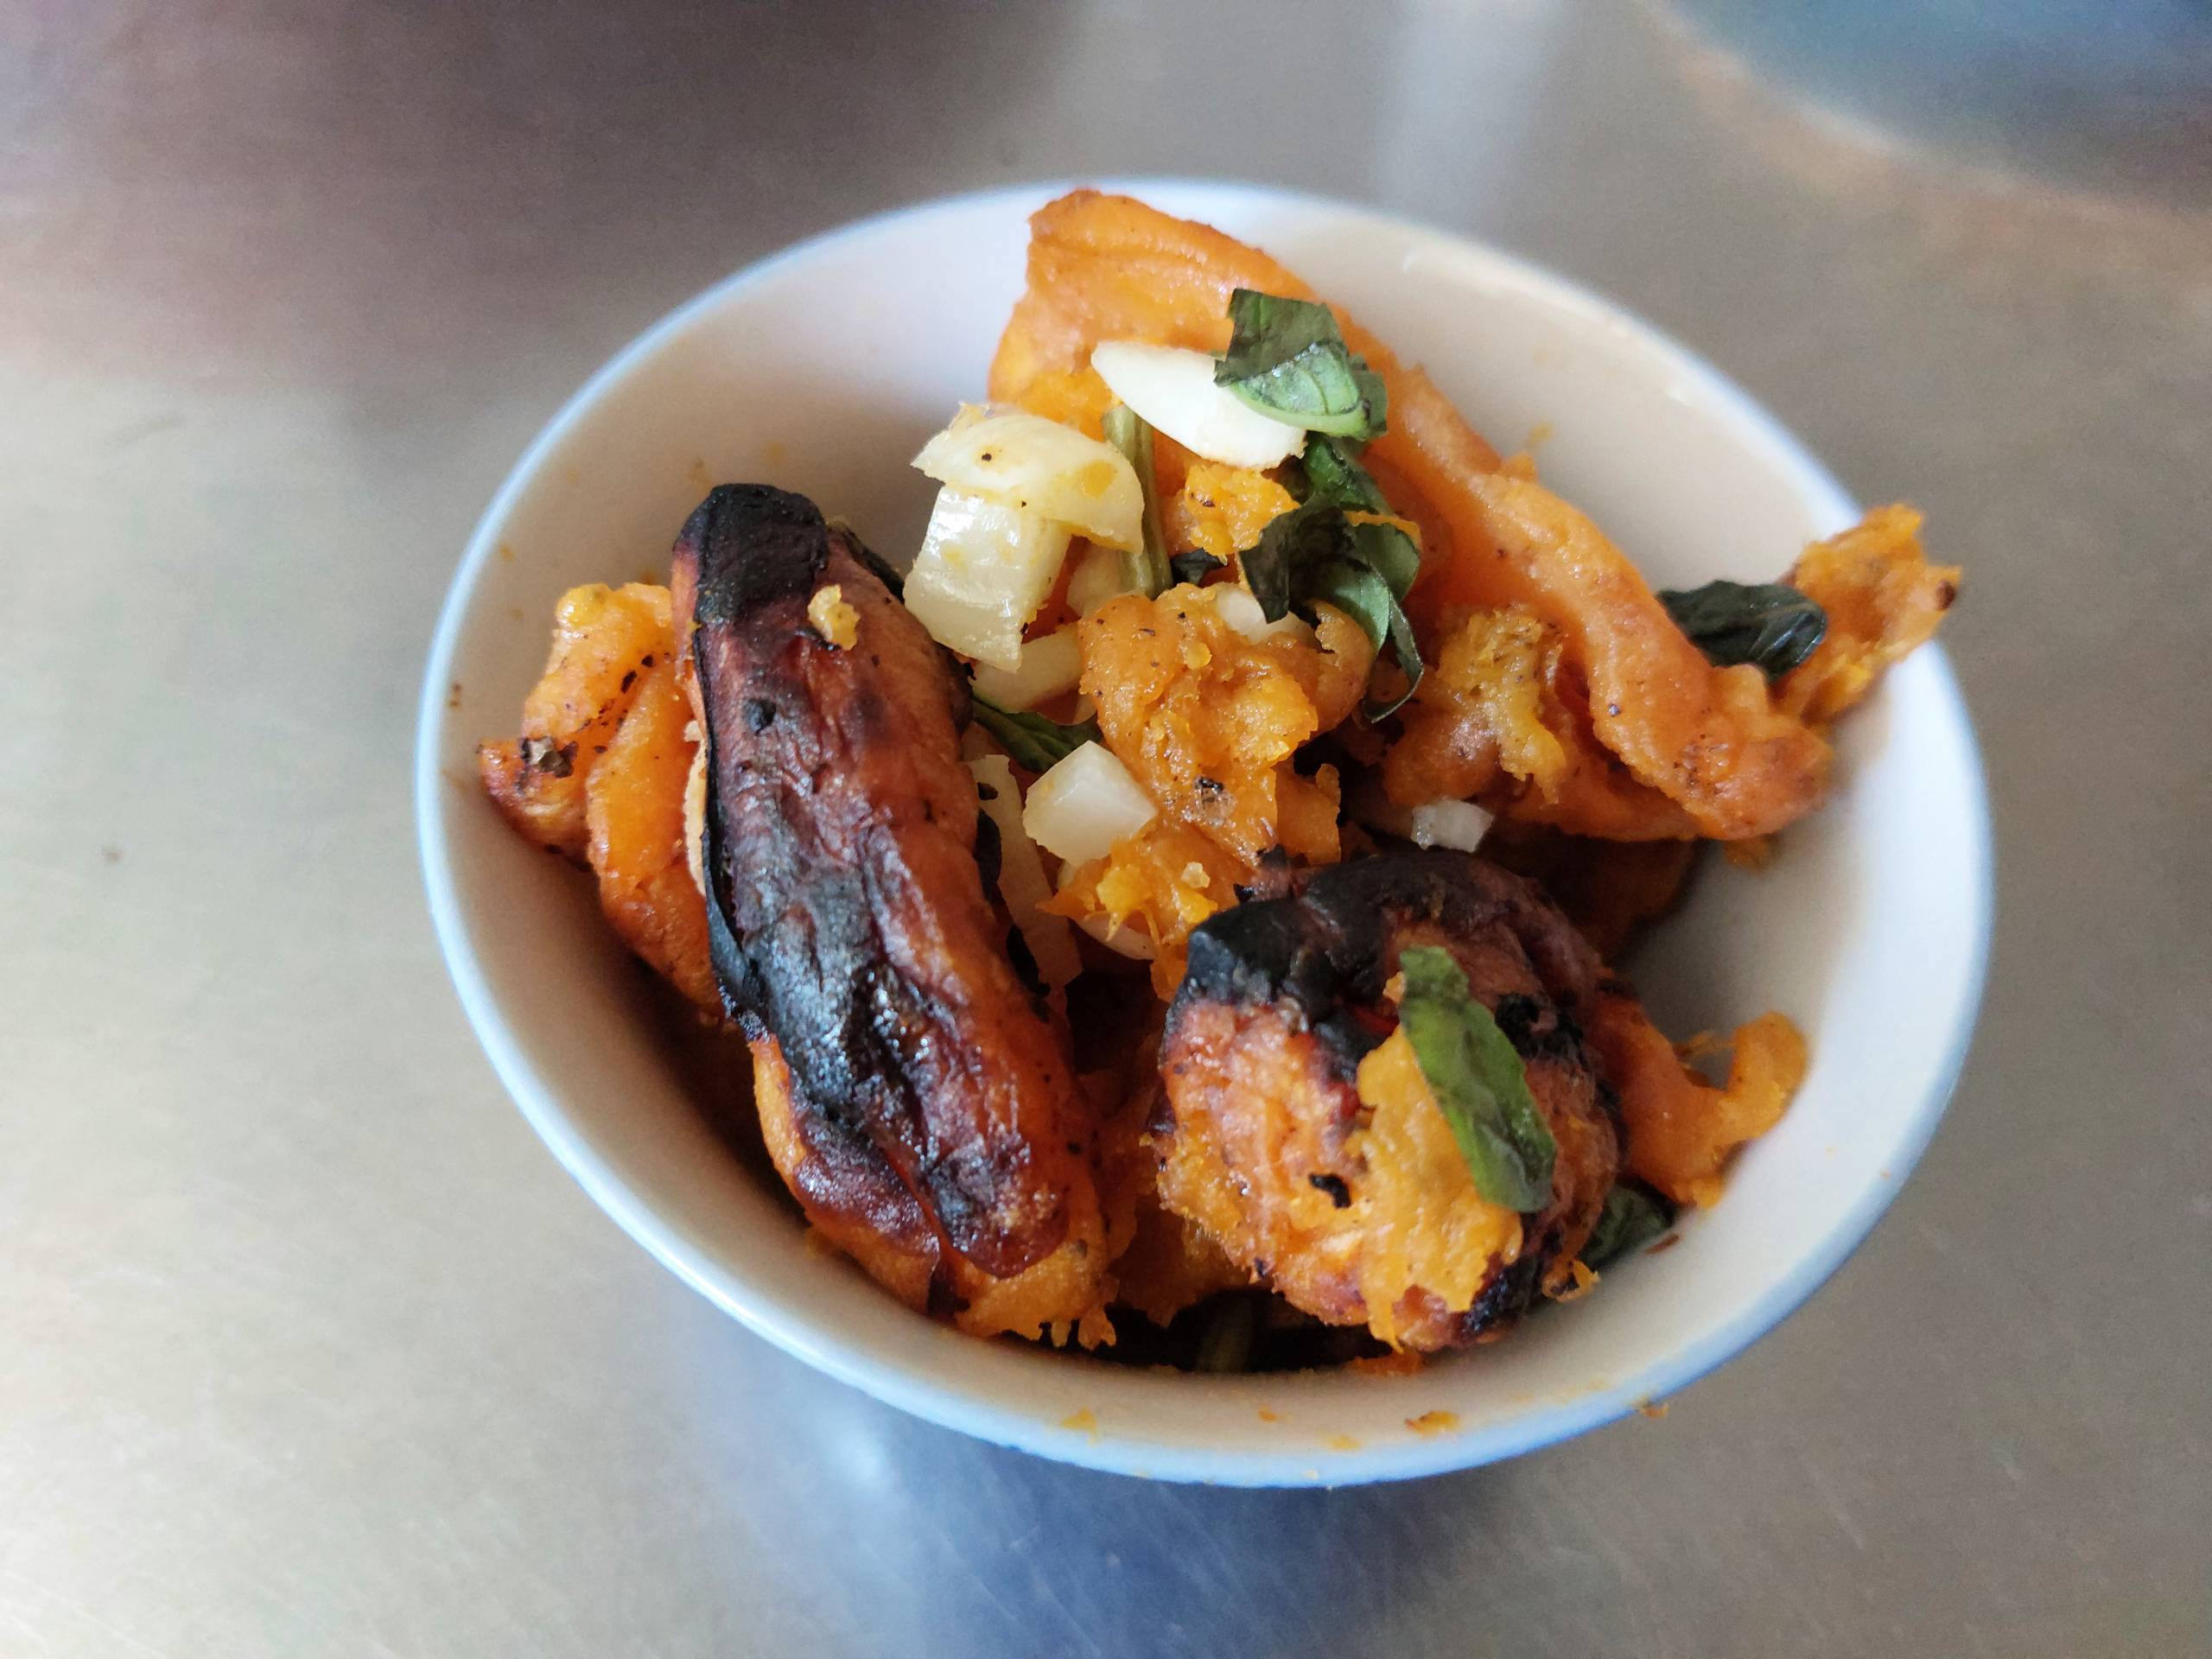 Roasted sweet potato served with garlic and basil